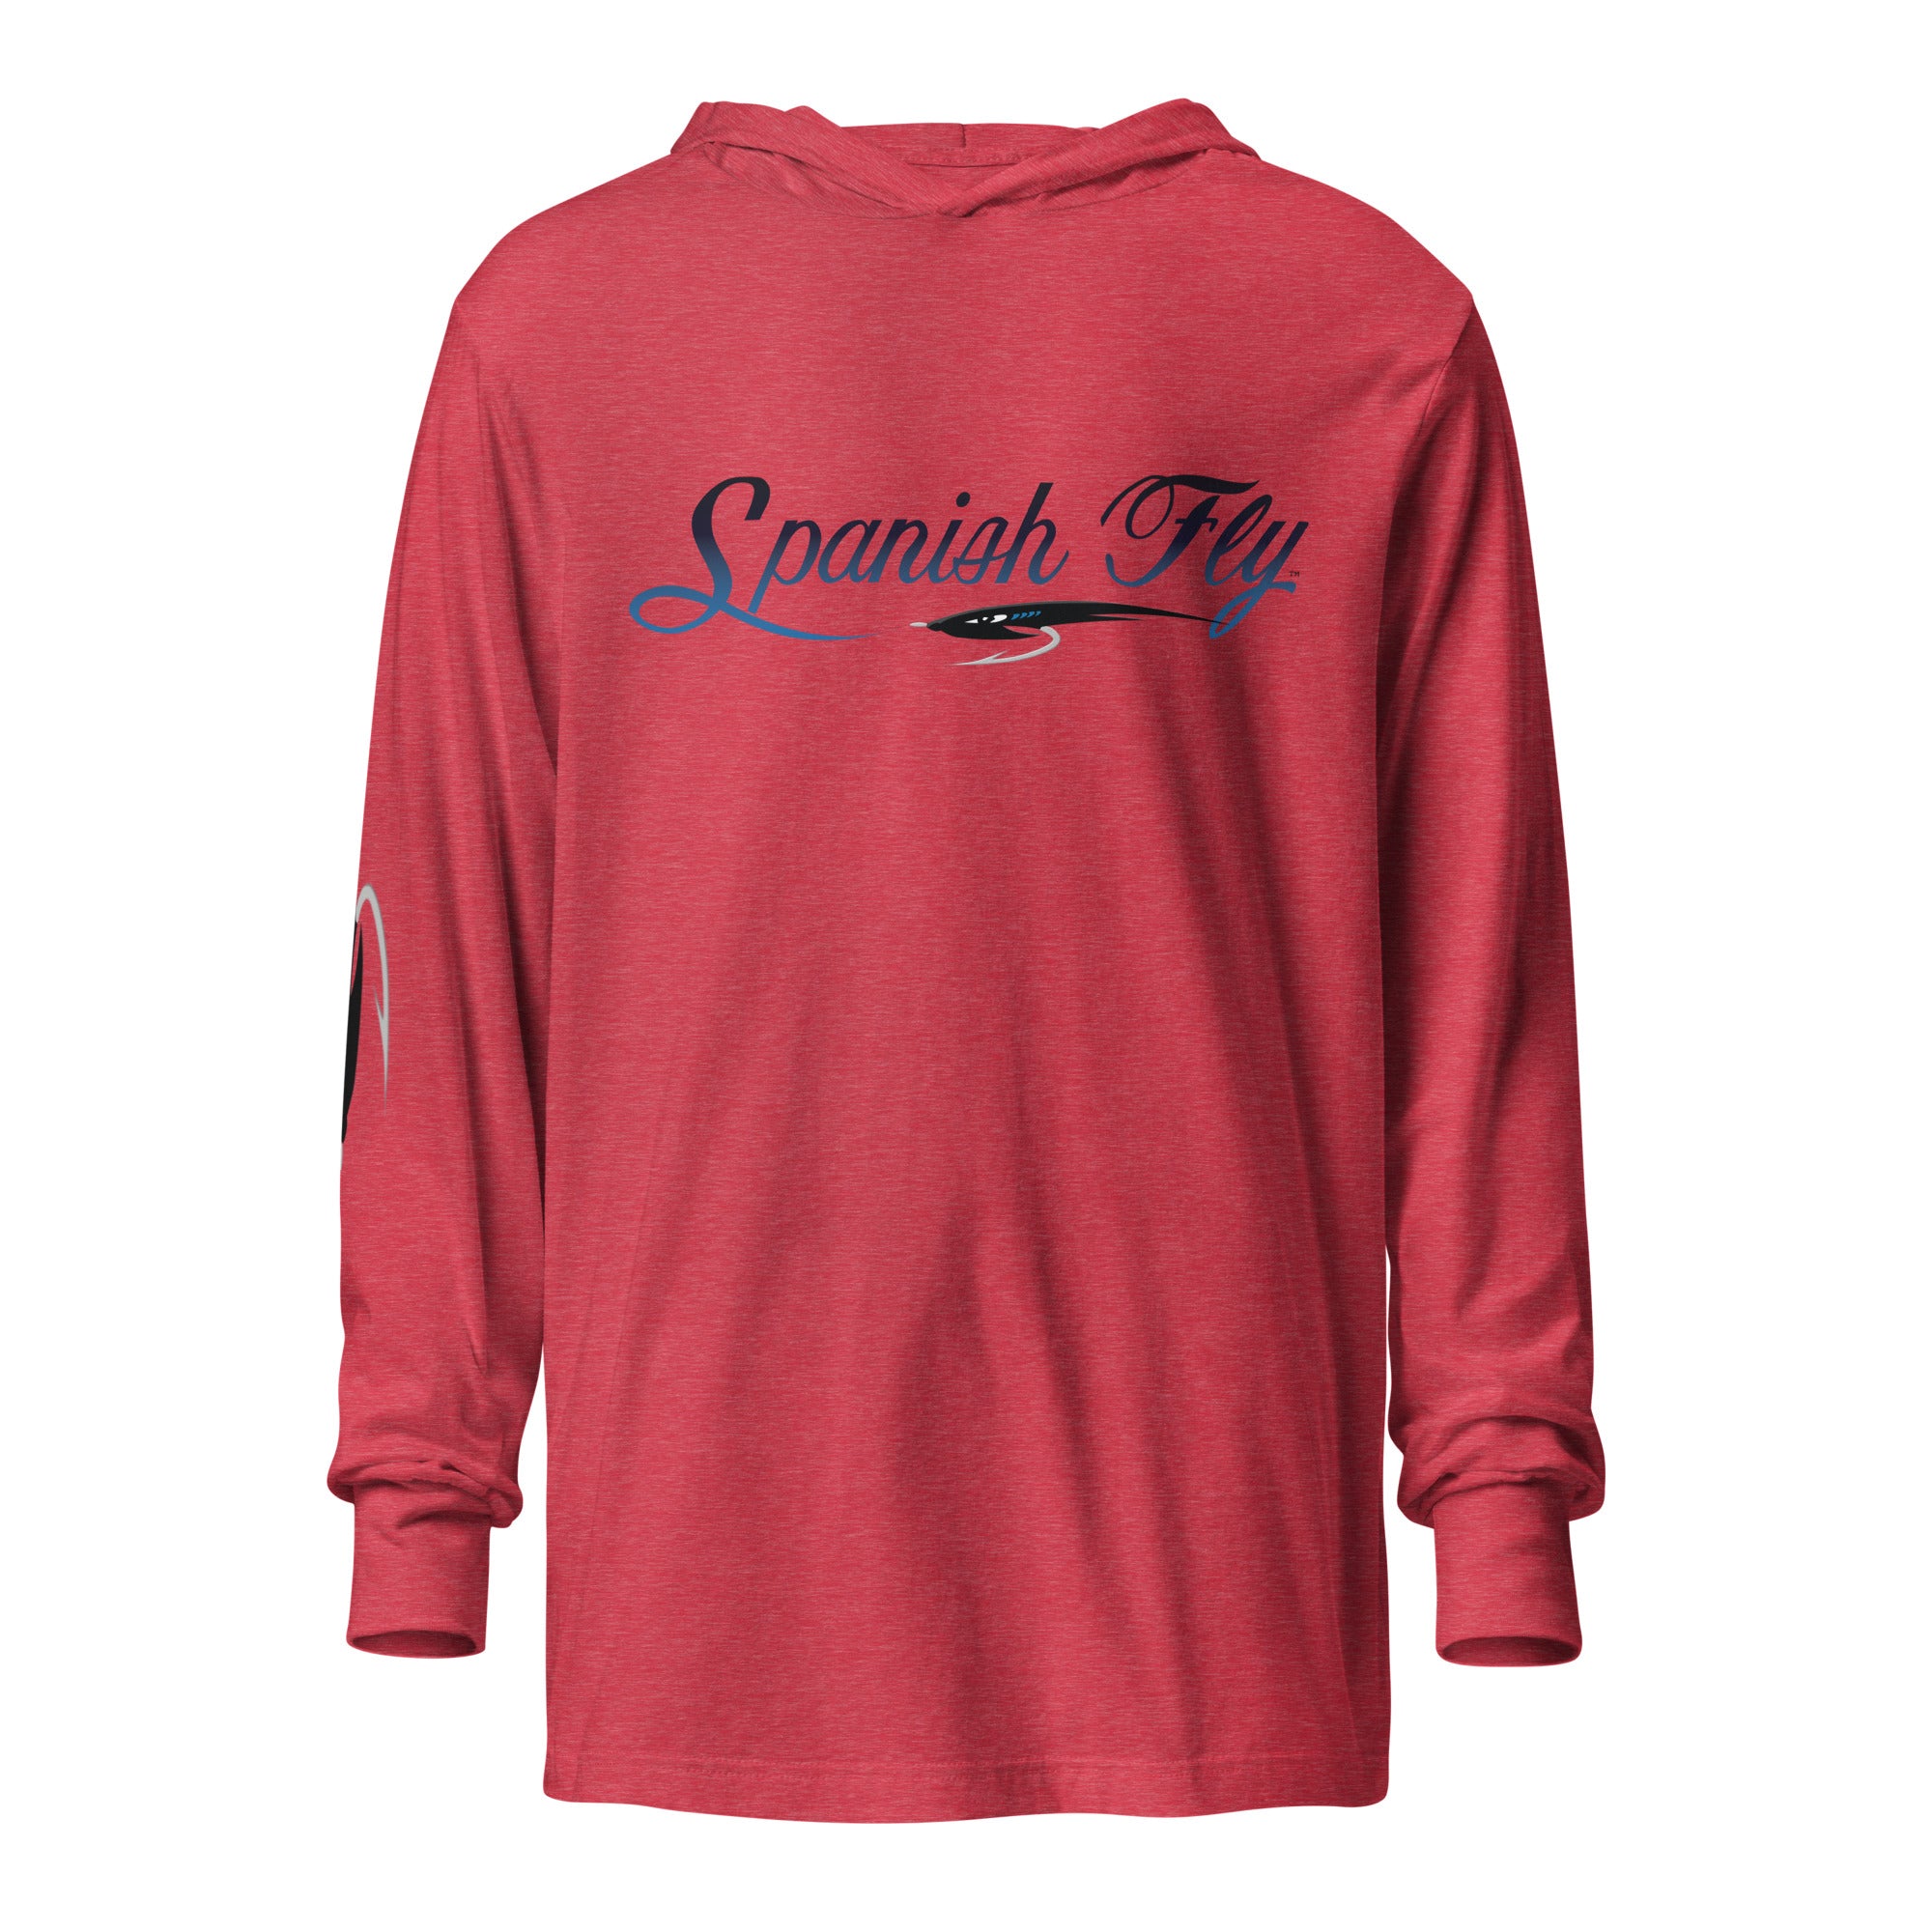 unisex-hooded-long-sleeve-tee-heather-red-front-653fd5a45144a.jpg